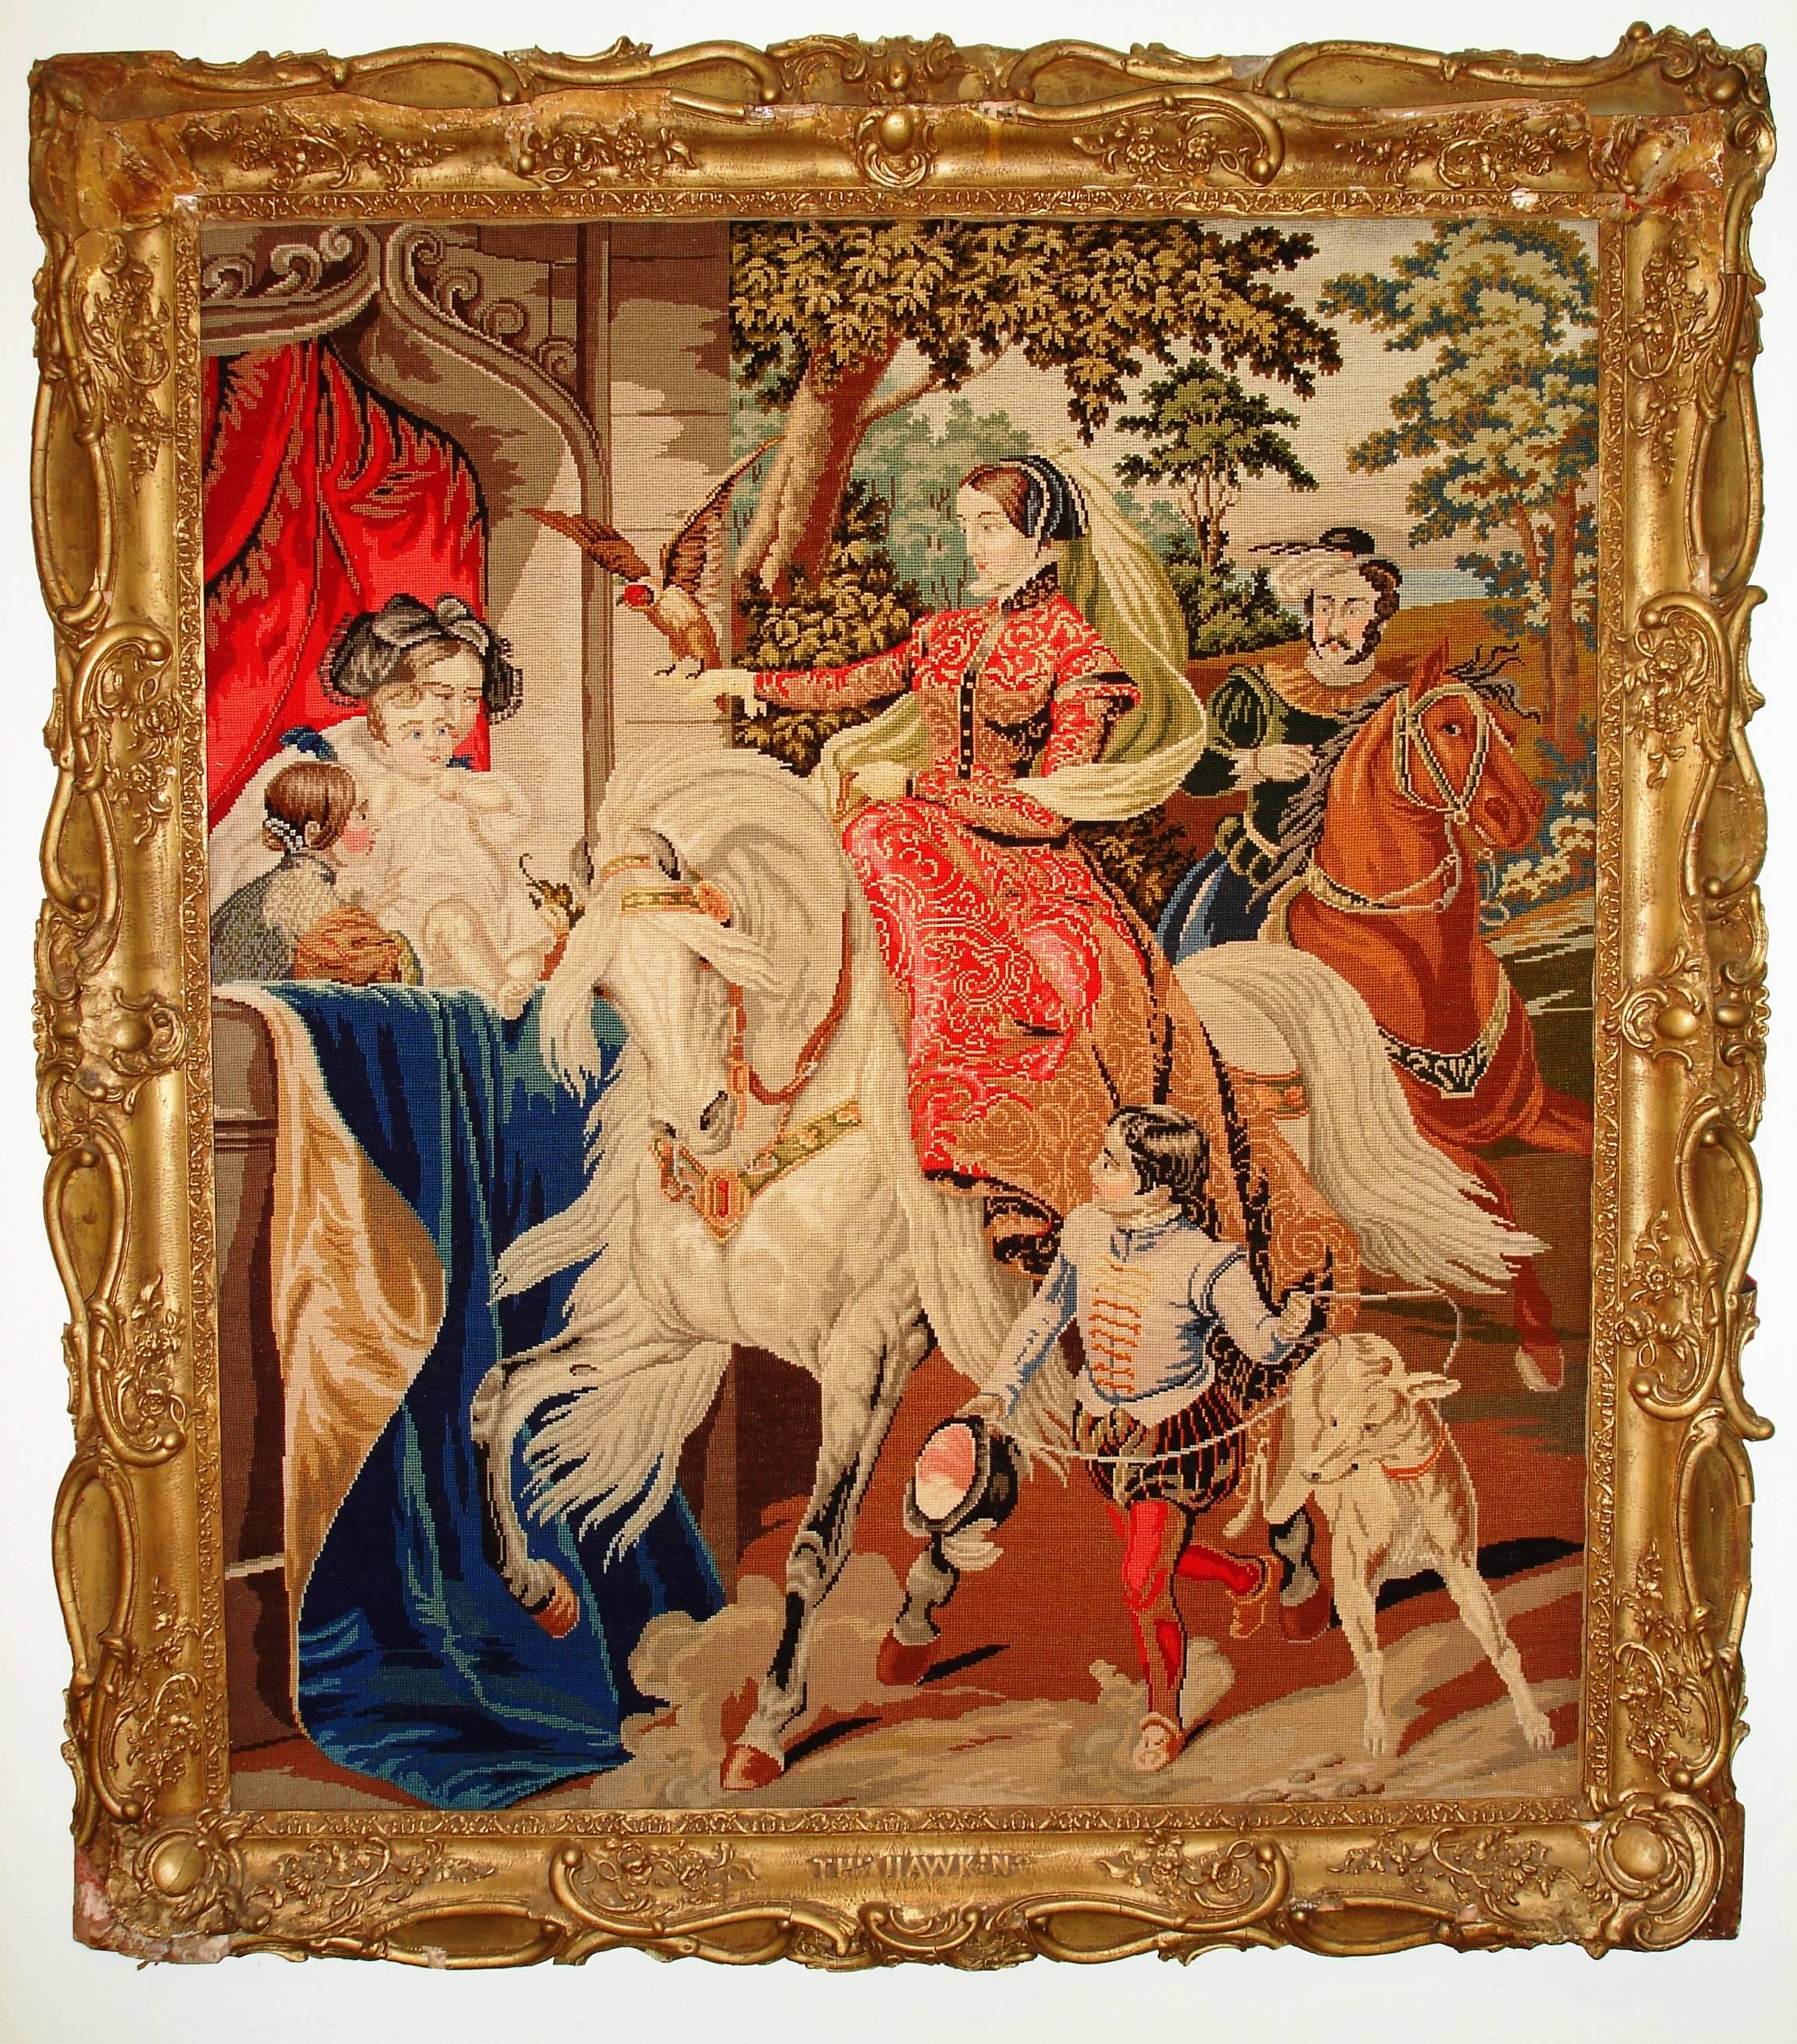 For A Royal Decor-Connoisseur's only!!

A Royal Regalia of the Royal Family, a 19th century magnificent truly one of a kind rare needlepoint tapestry depicting. A Renaissance style 16th century procession. Very fine beautiful handmade needlepoint